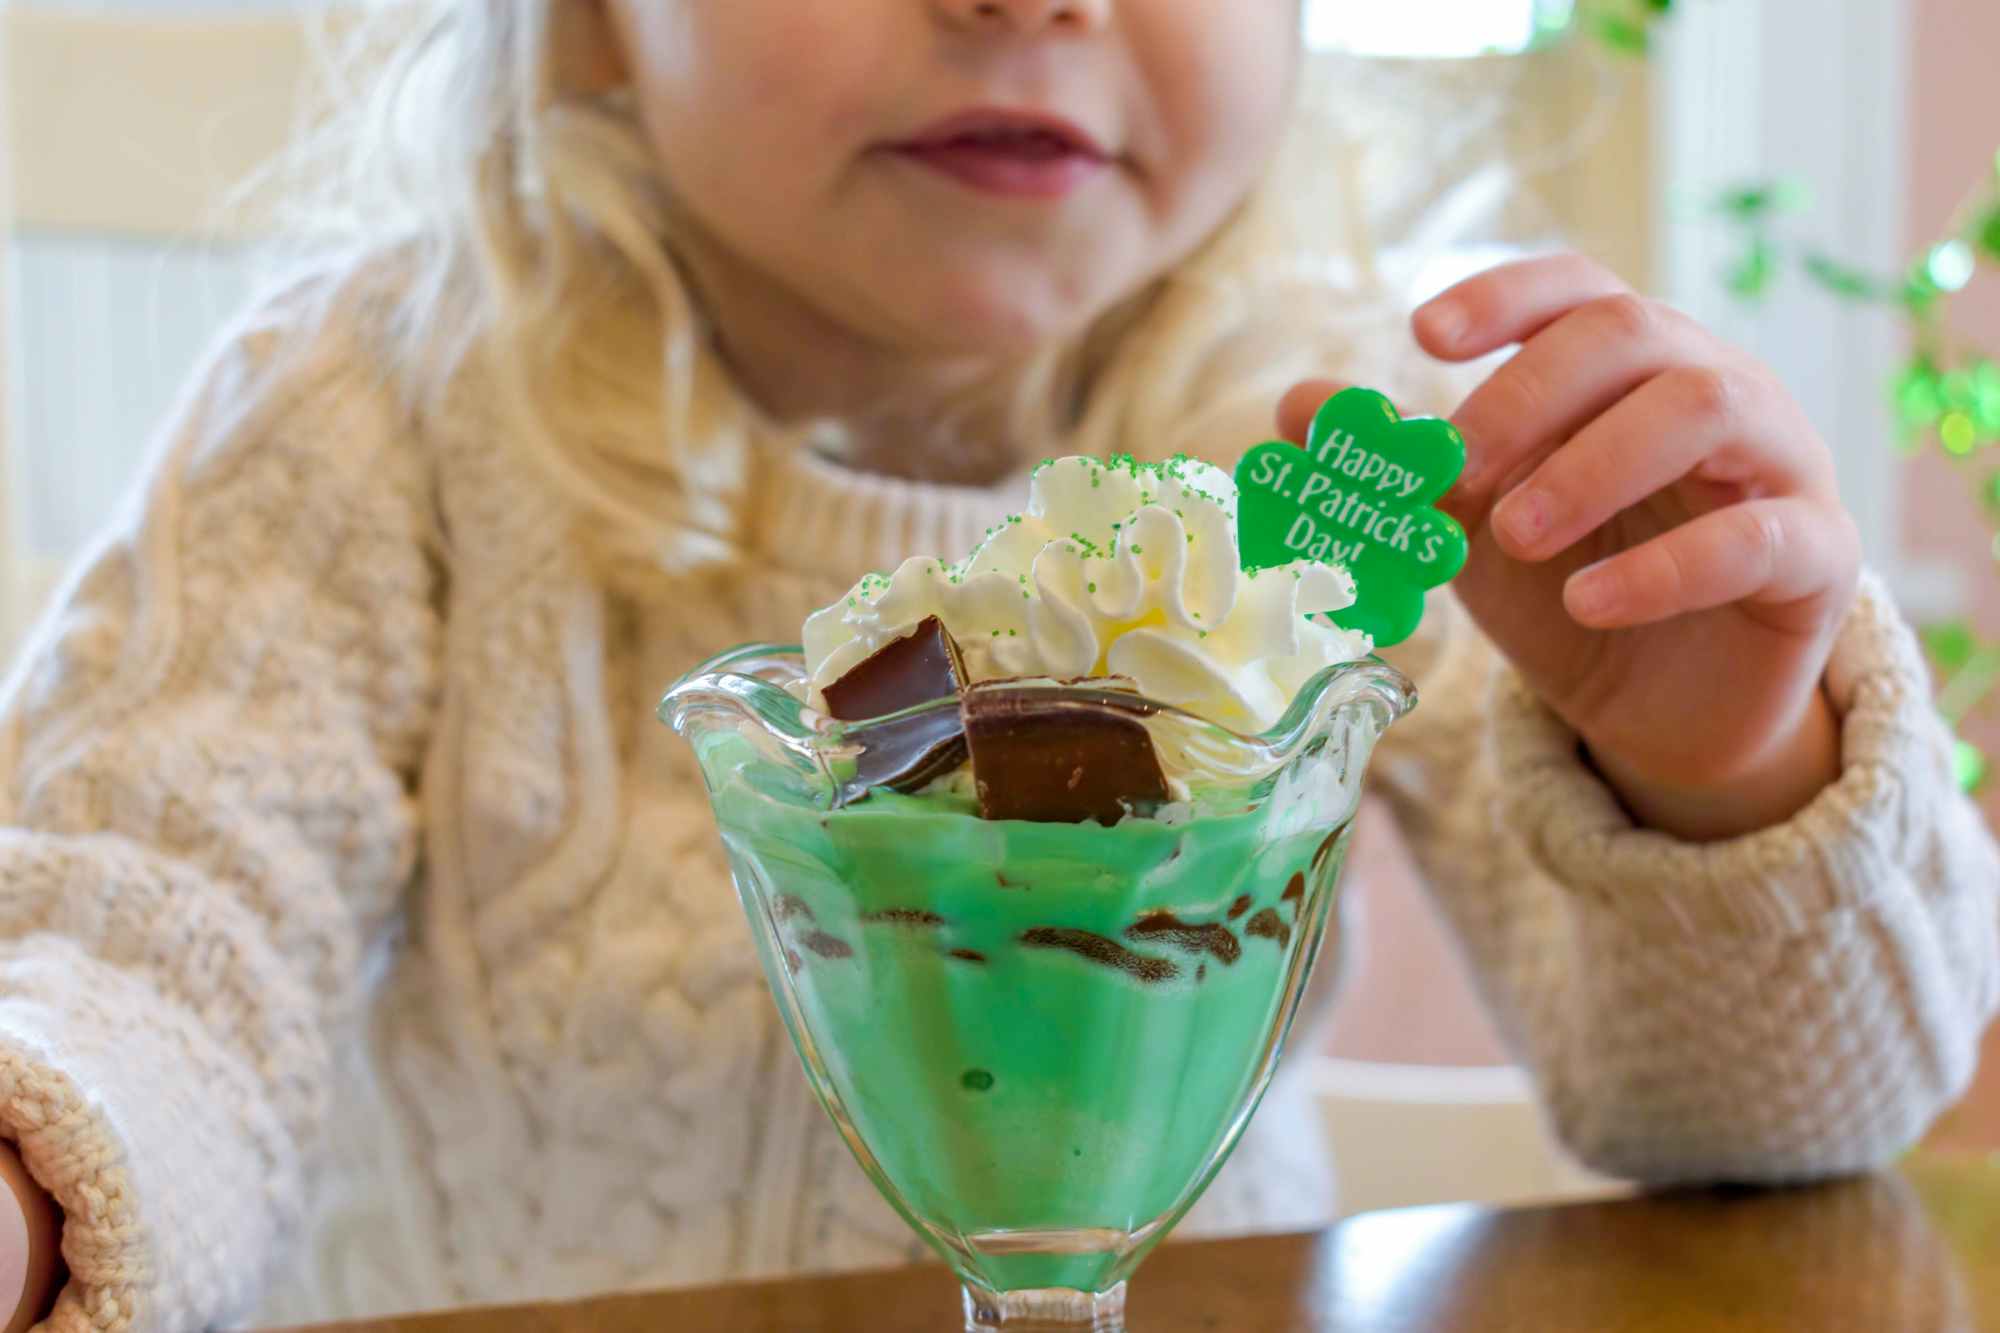 A little girl about to eat a green ice cream sundae